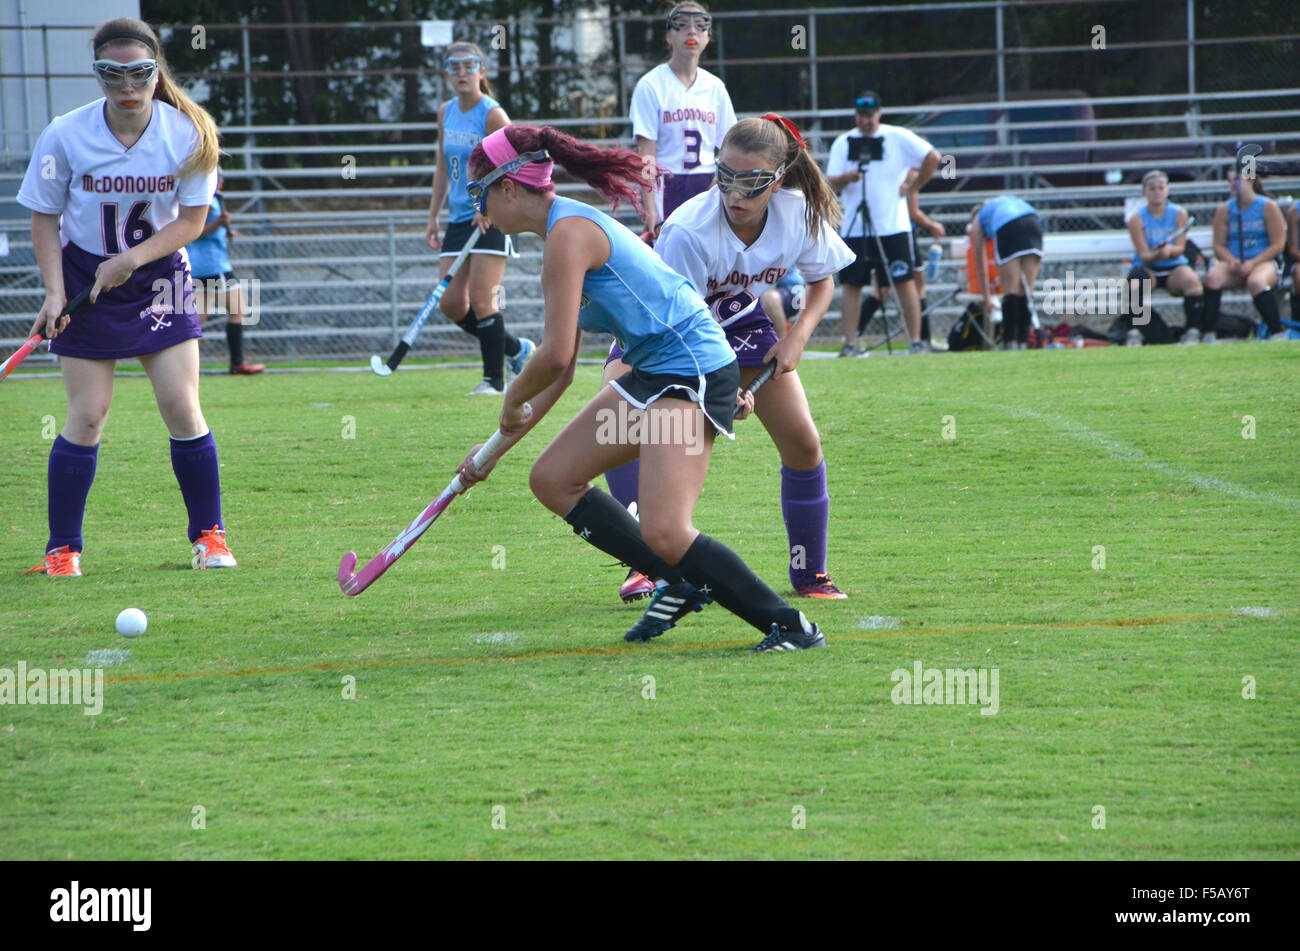 Girls playing field hockey in a high school game Stock Photo